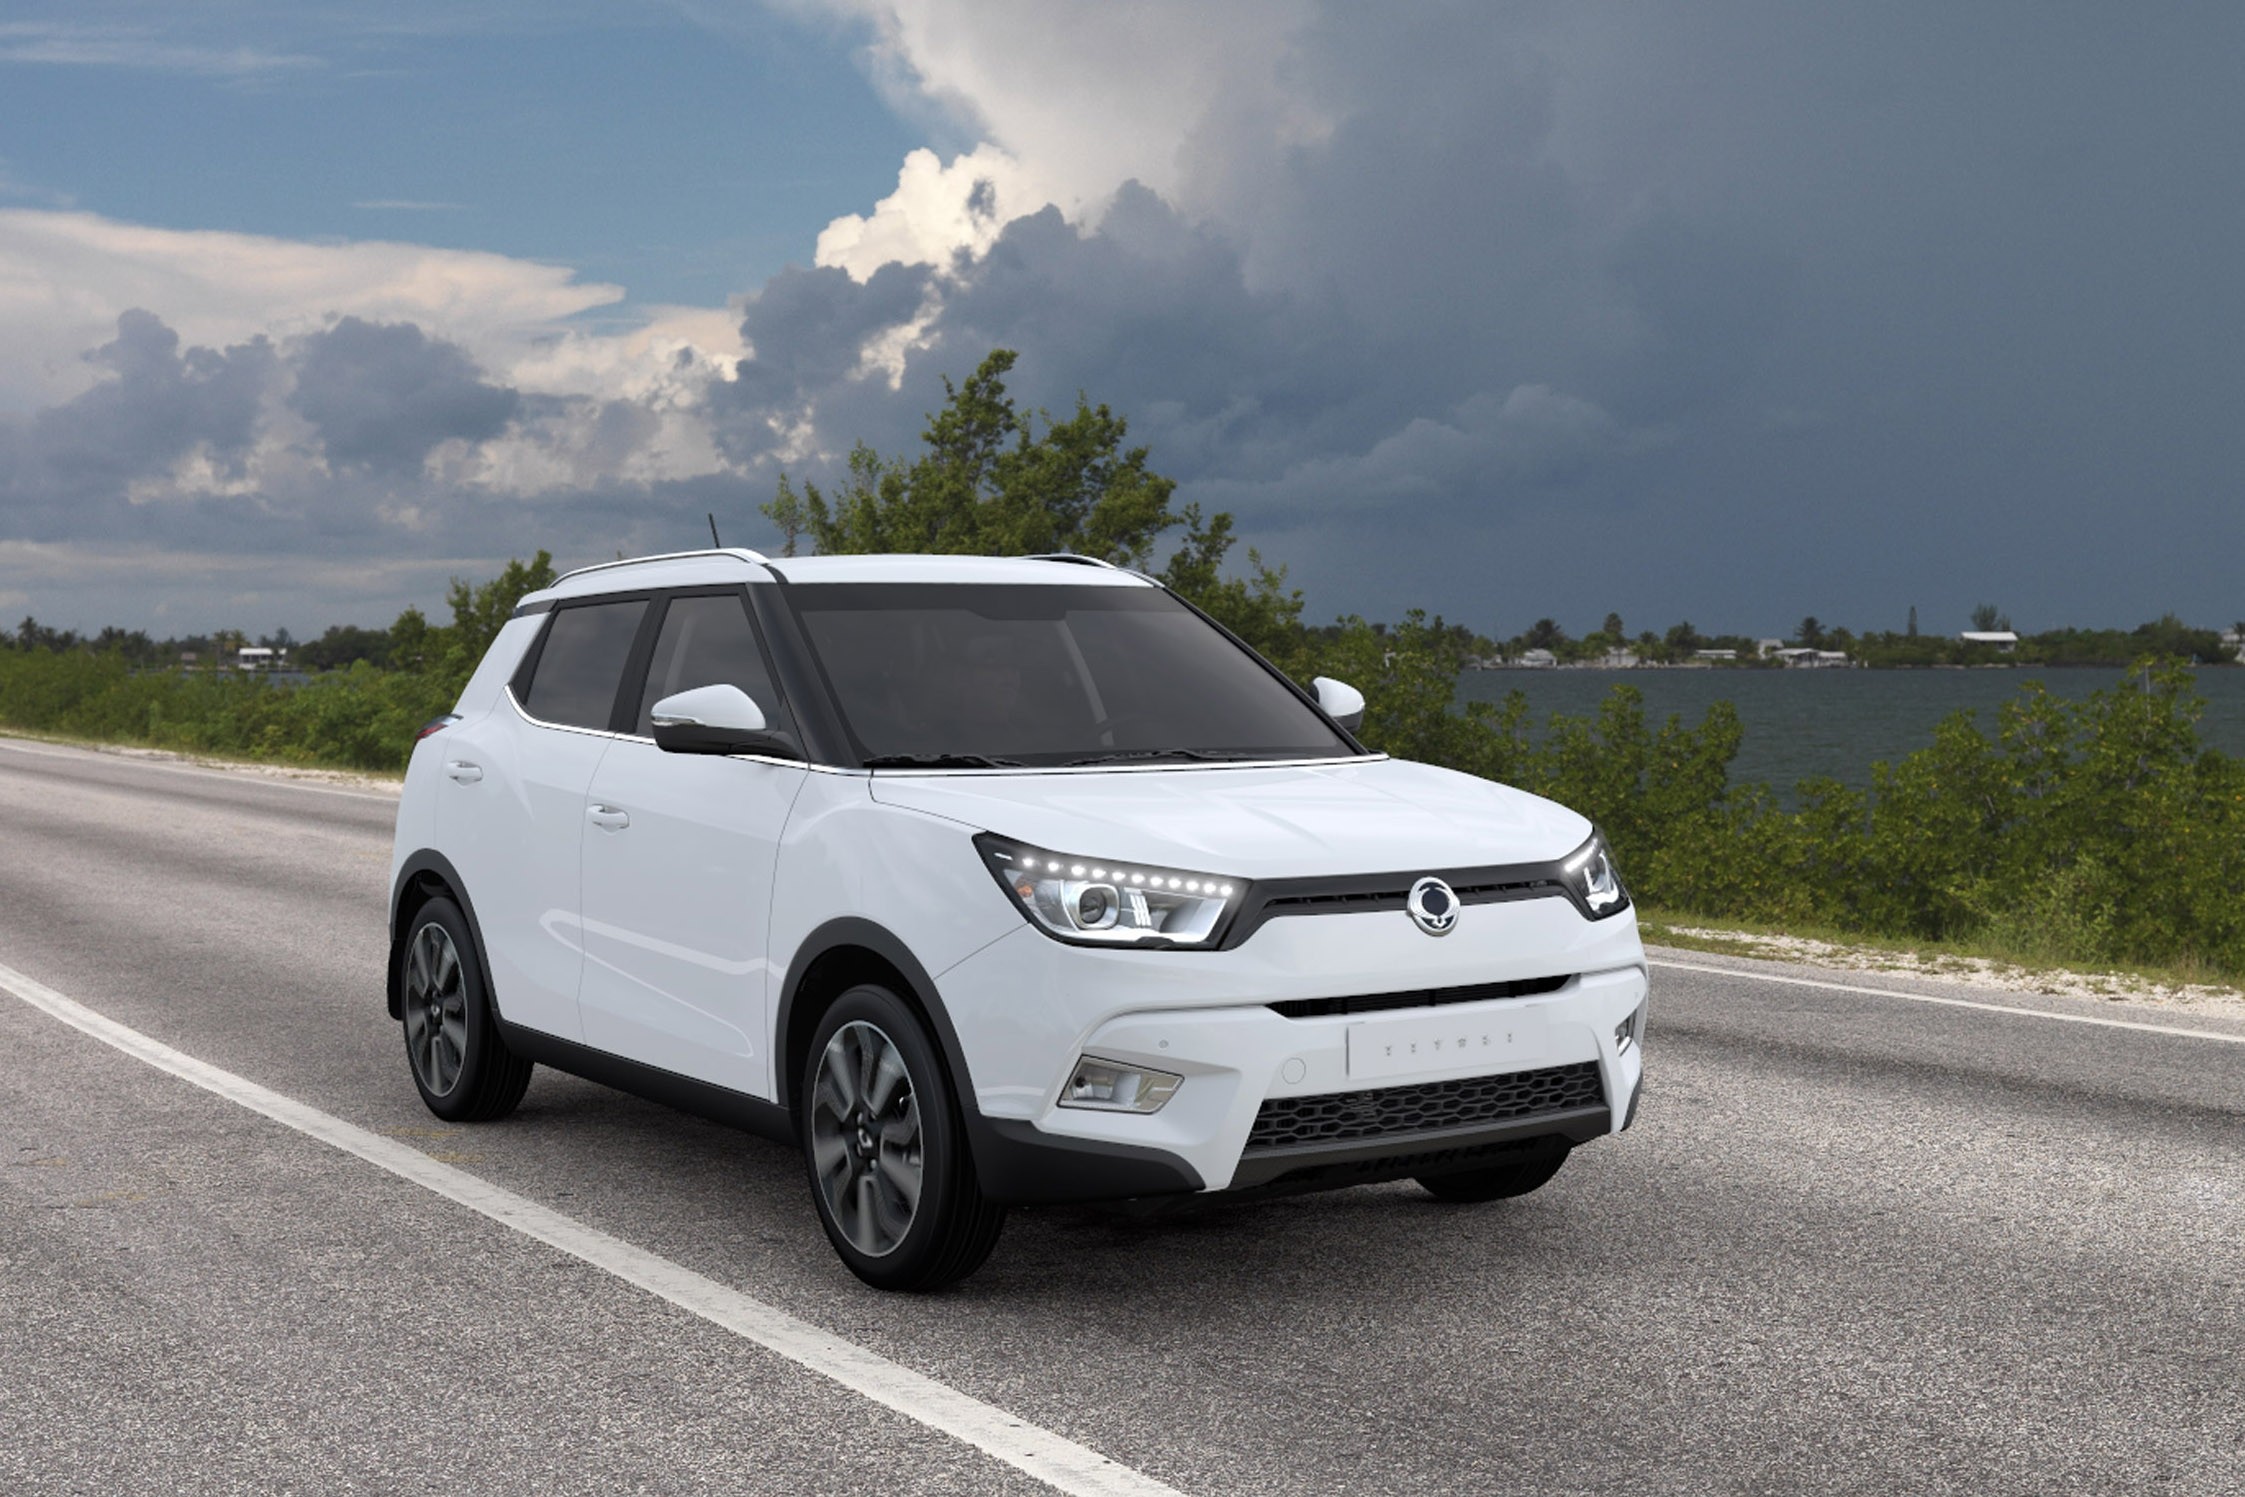 SsangYong Tivoli Pricing Announced for the UK - autoevolution